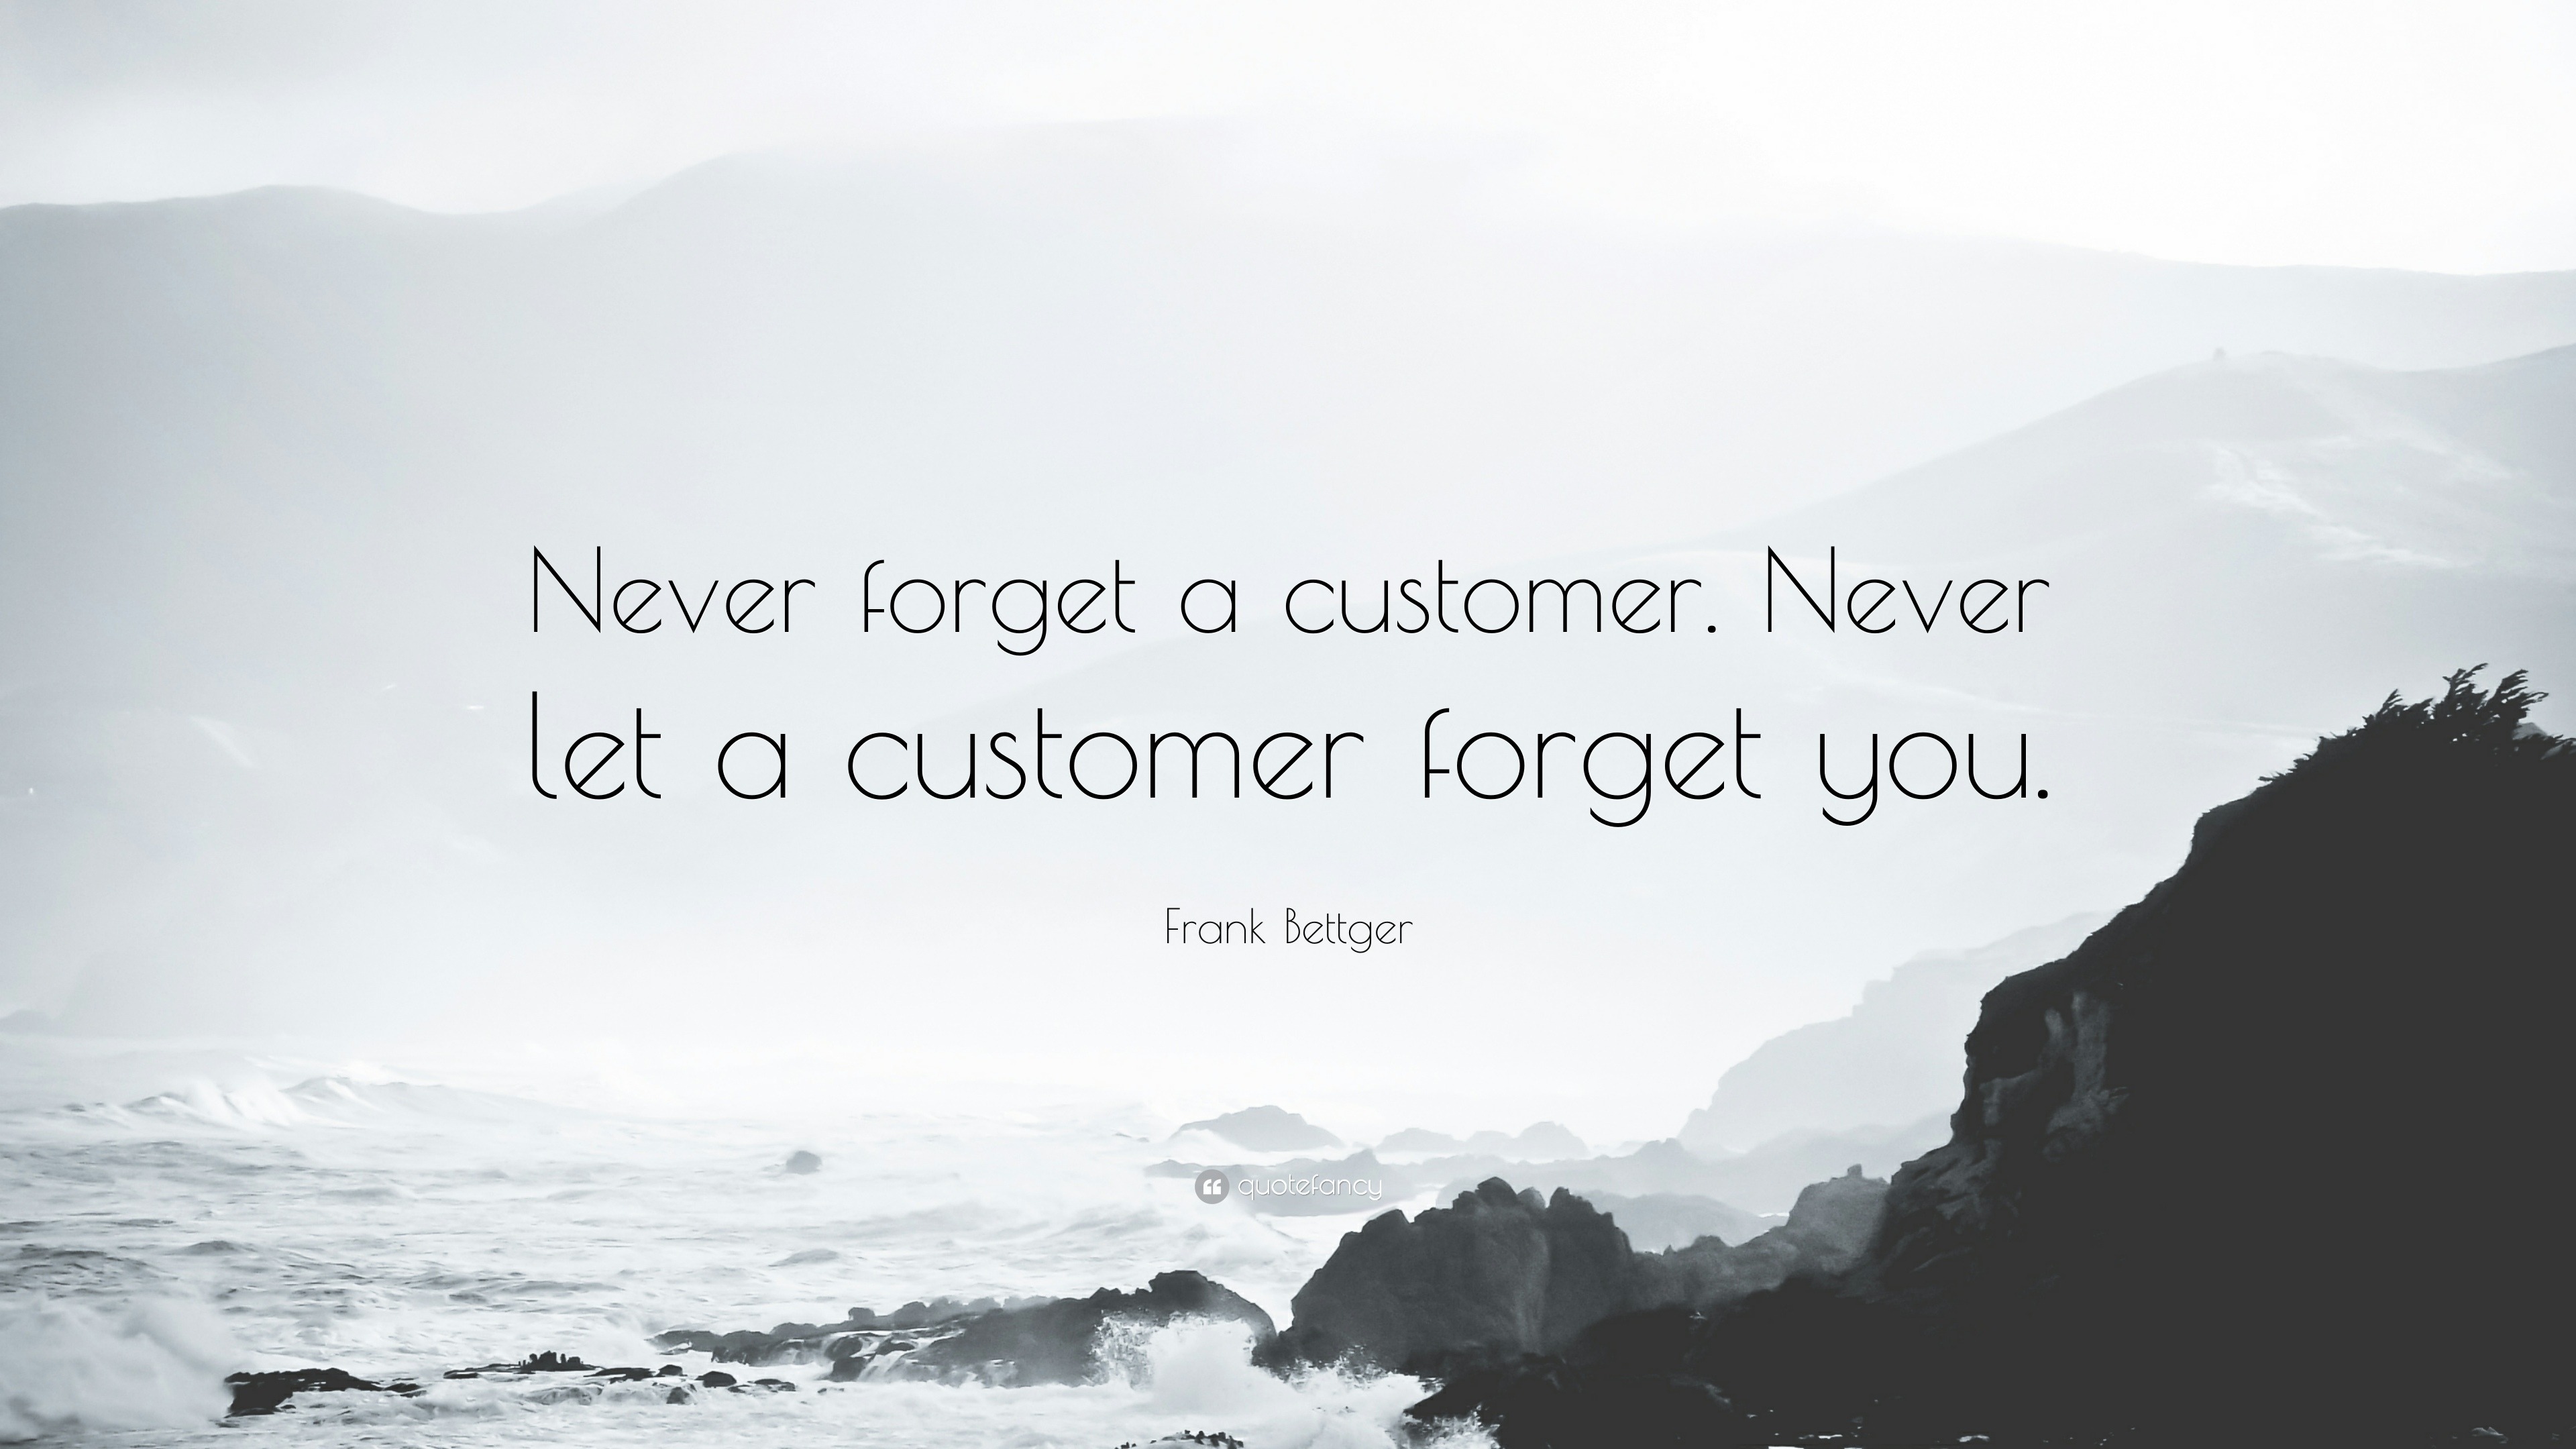 Frank Bettger Quote: “Never Forget A Customer. Never Let A Customer Forget You.”